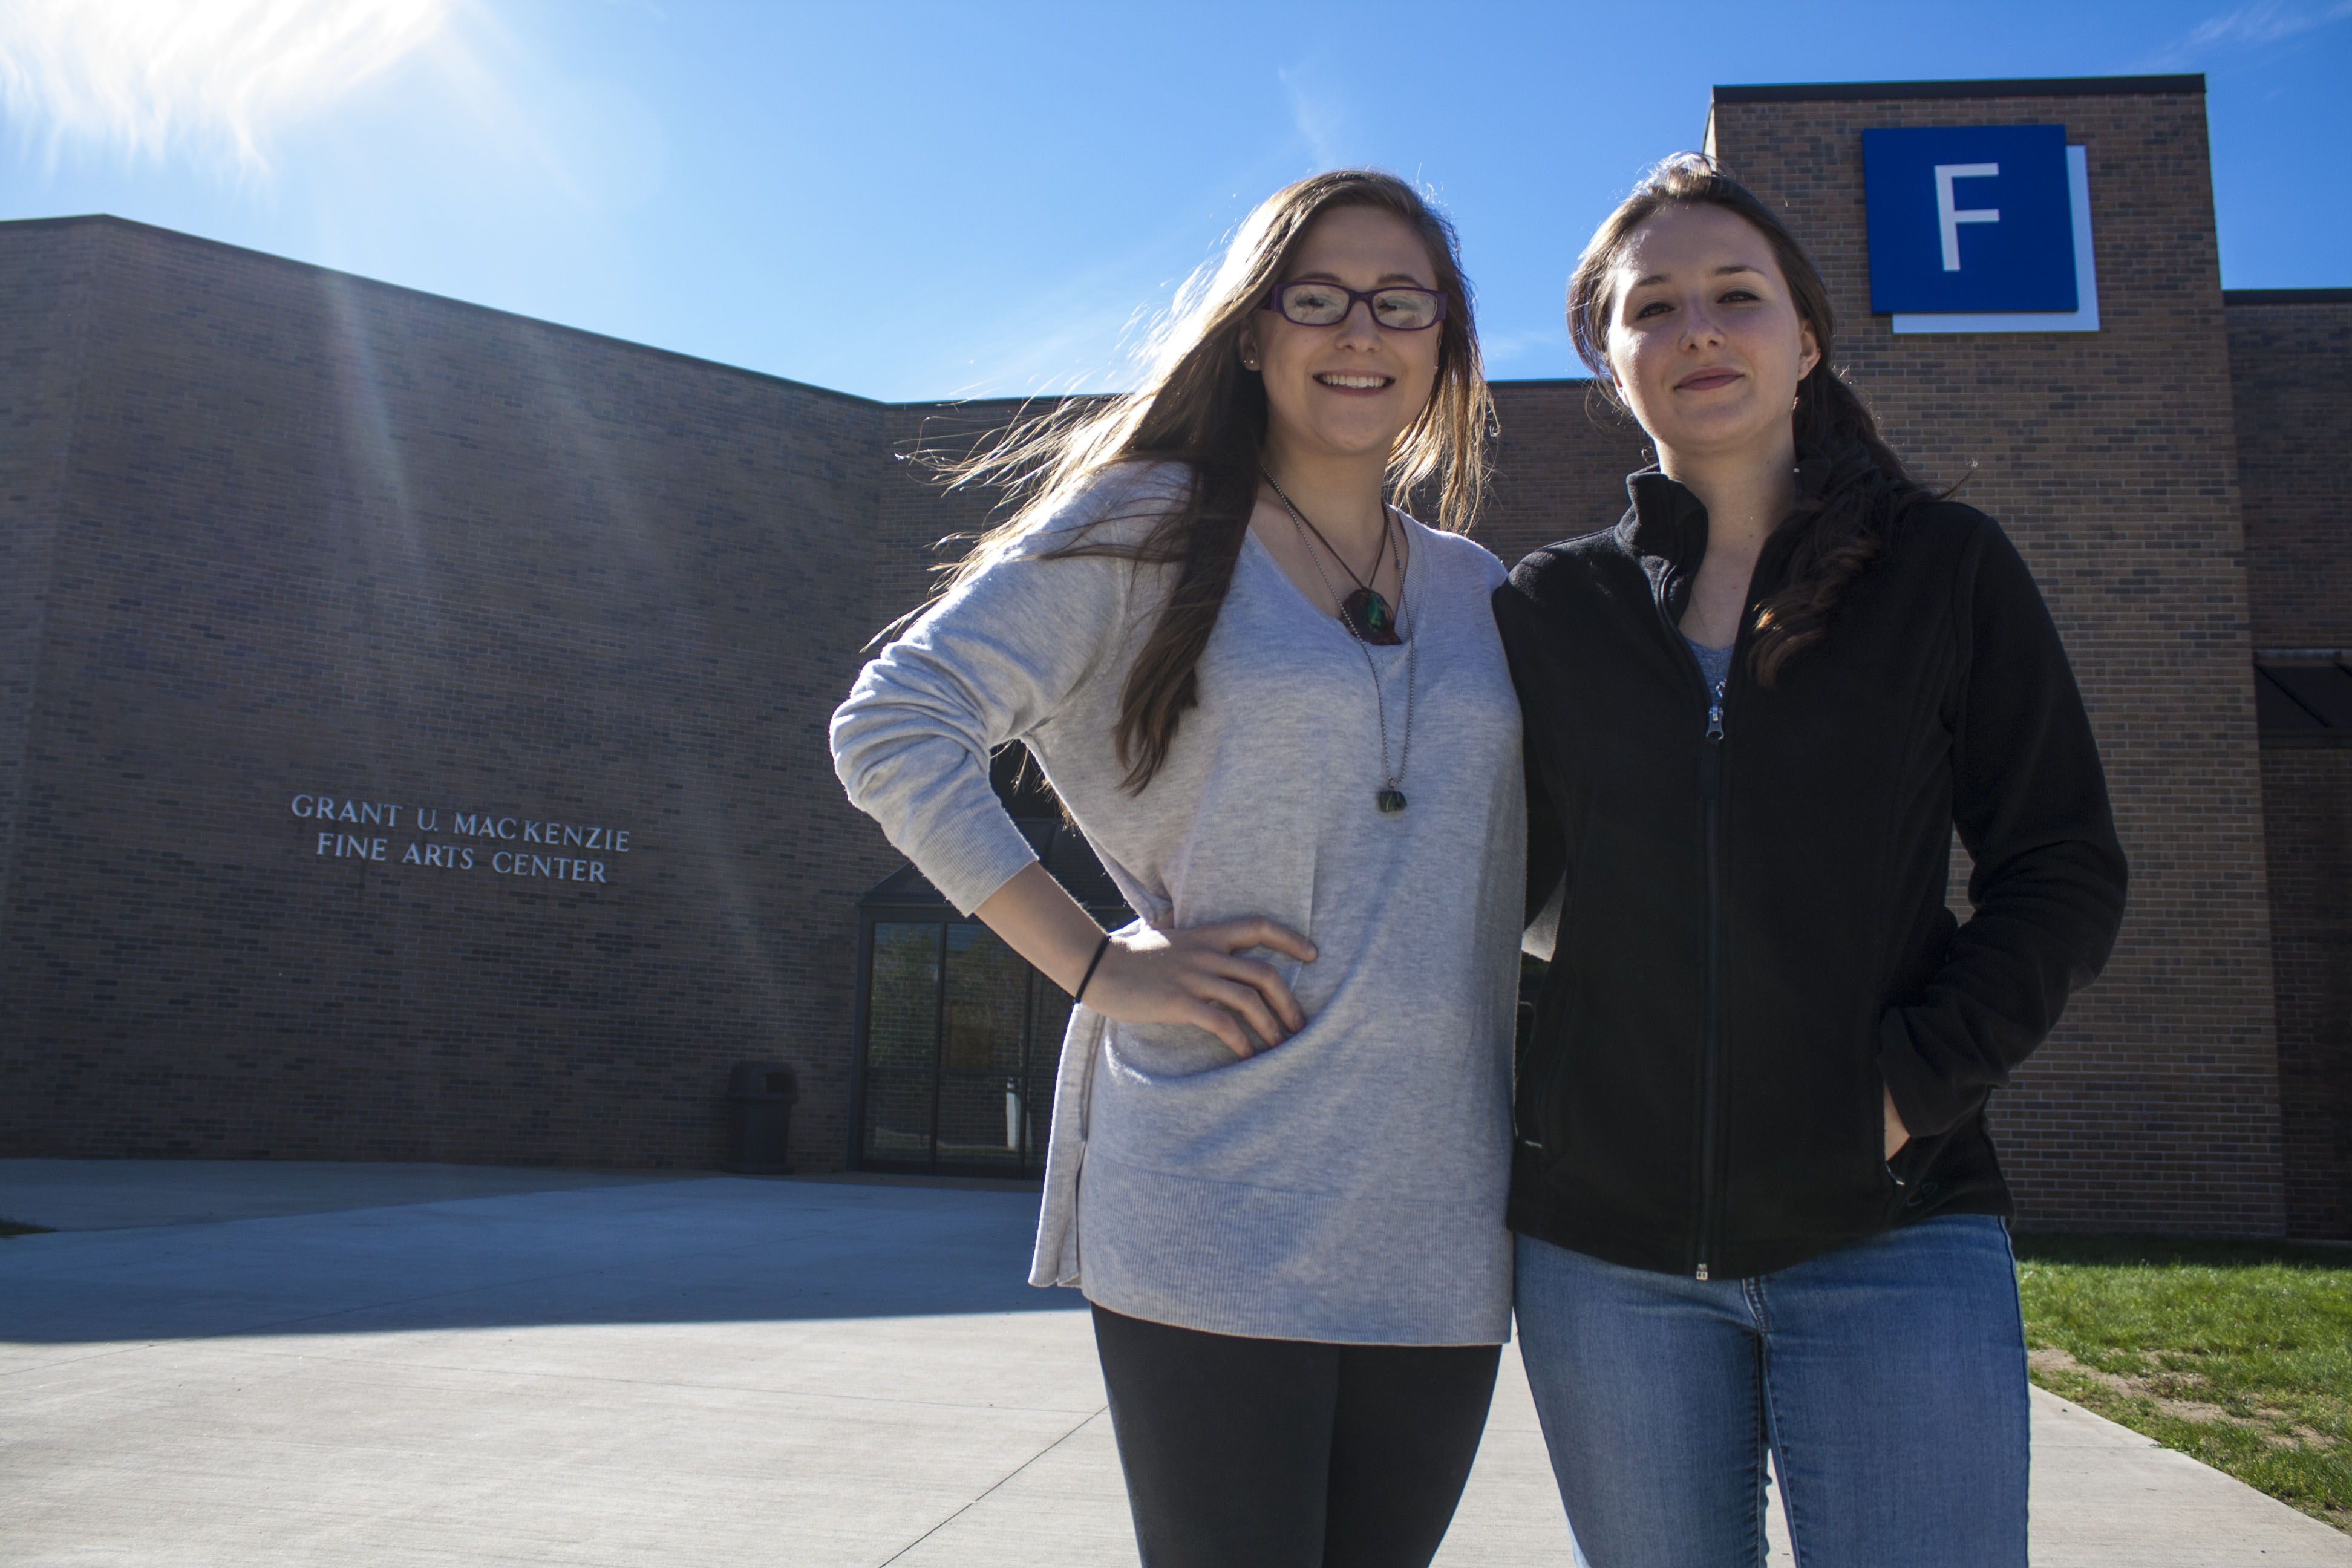 Victoria Hart and Sophia Hart standing outside the Fine Arts building at Henry Ford College in the fall with the sun shining.